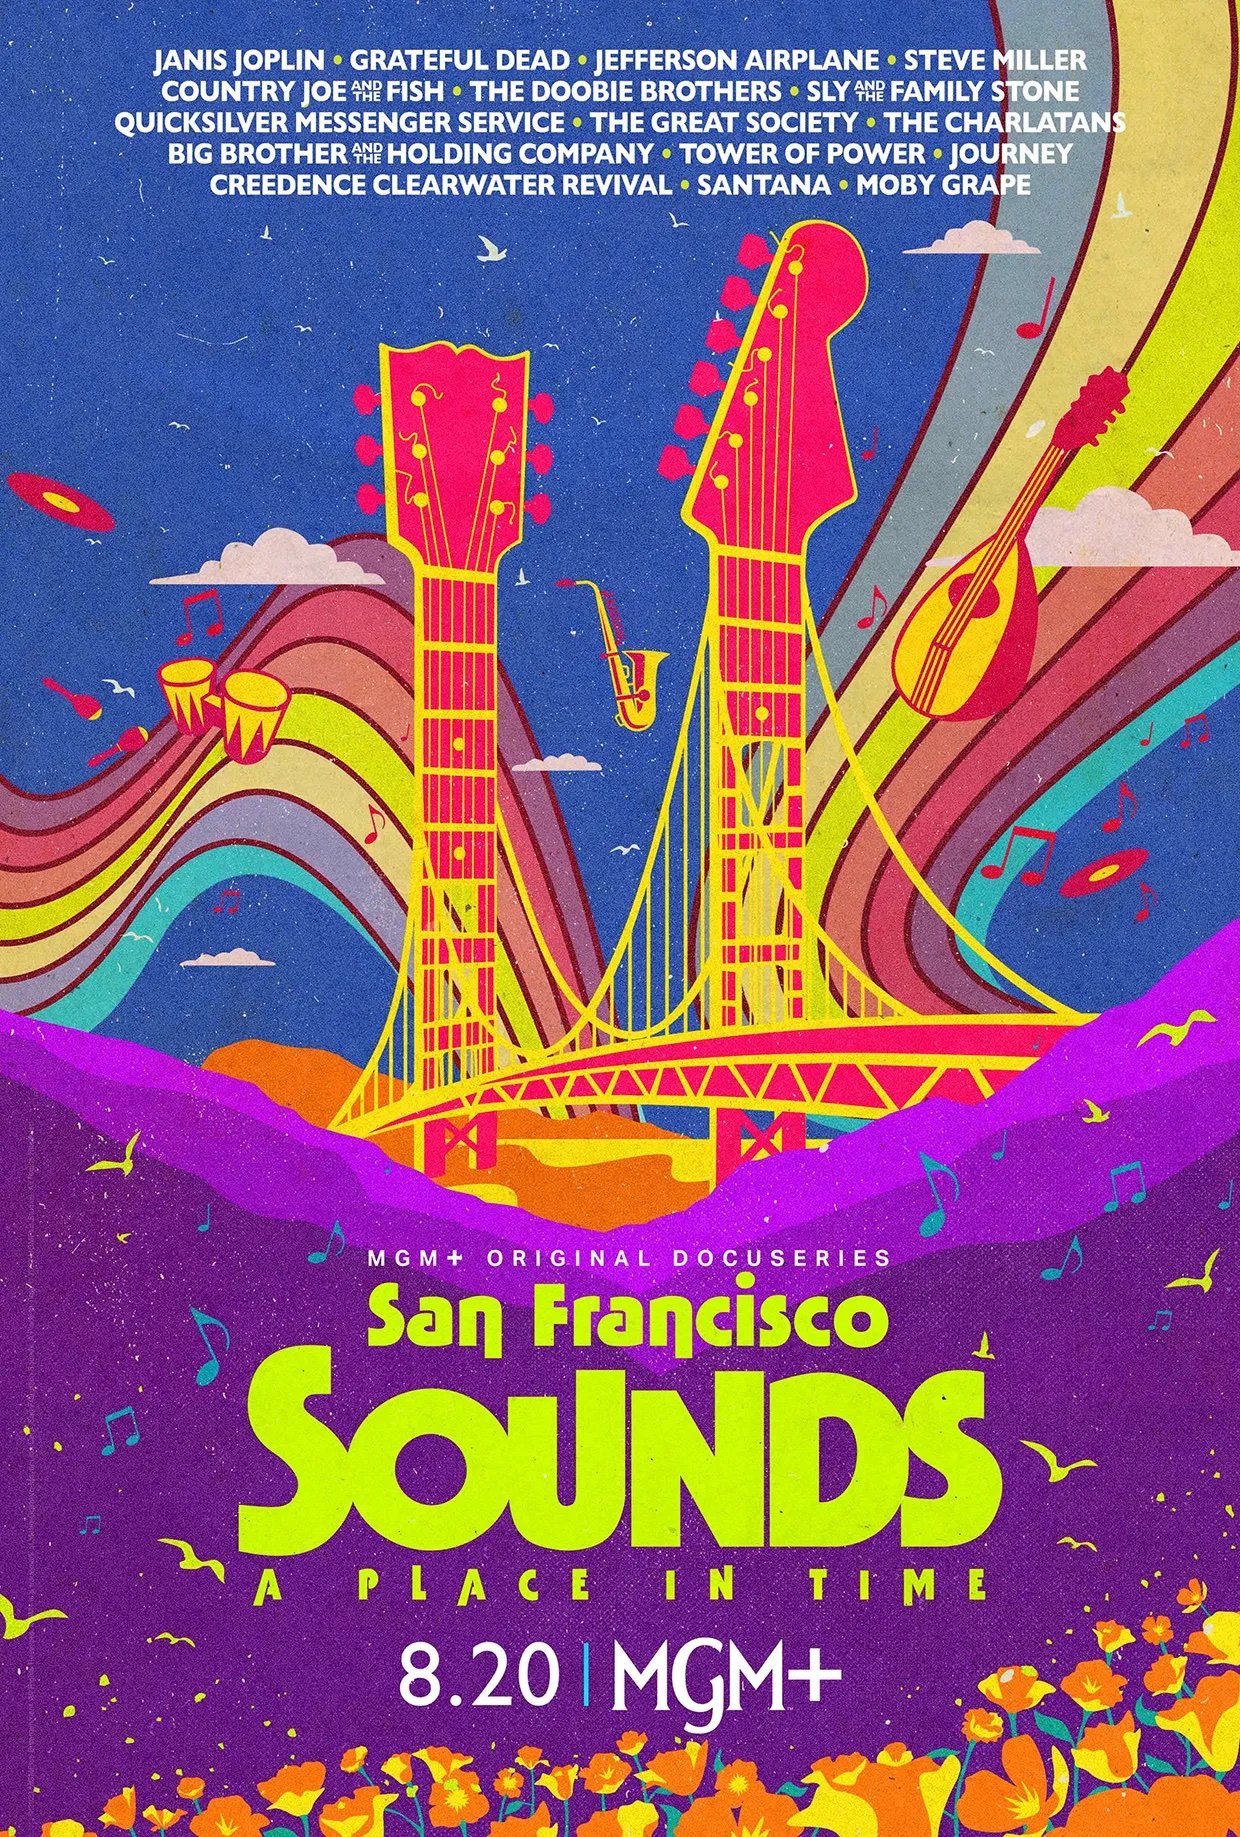 san-francisco-sound-a-place-in-time-poster-2023-billboard-1240.jpg